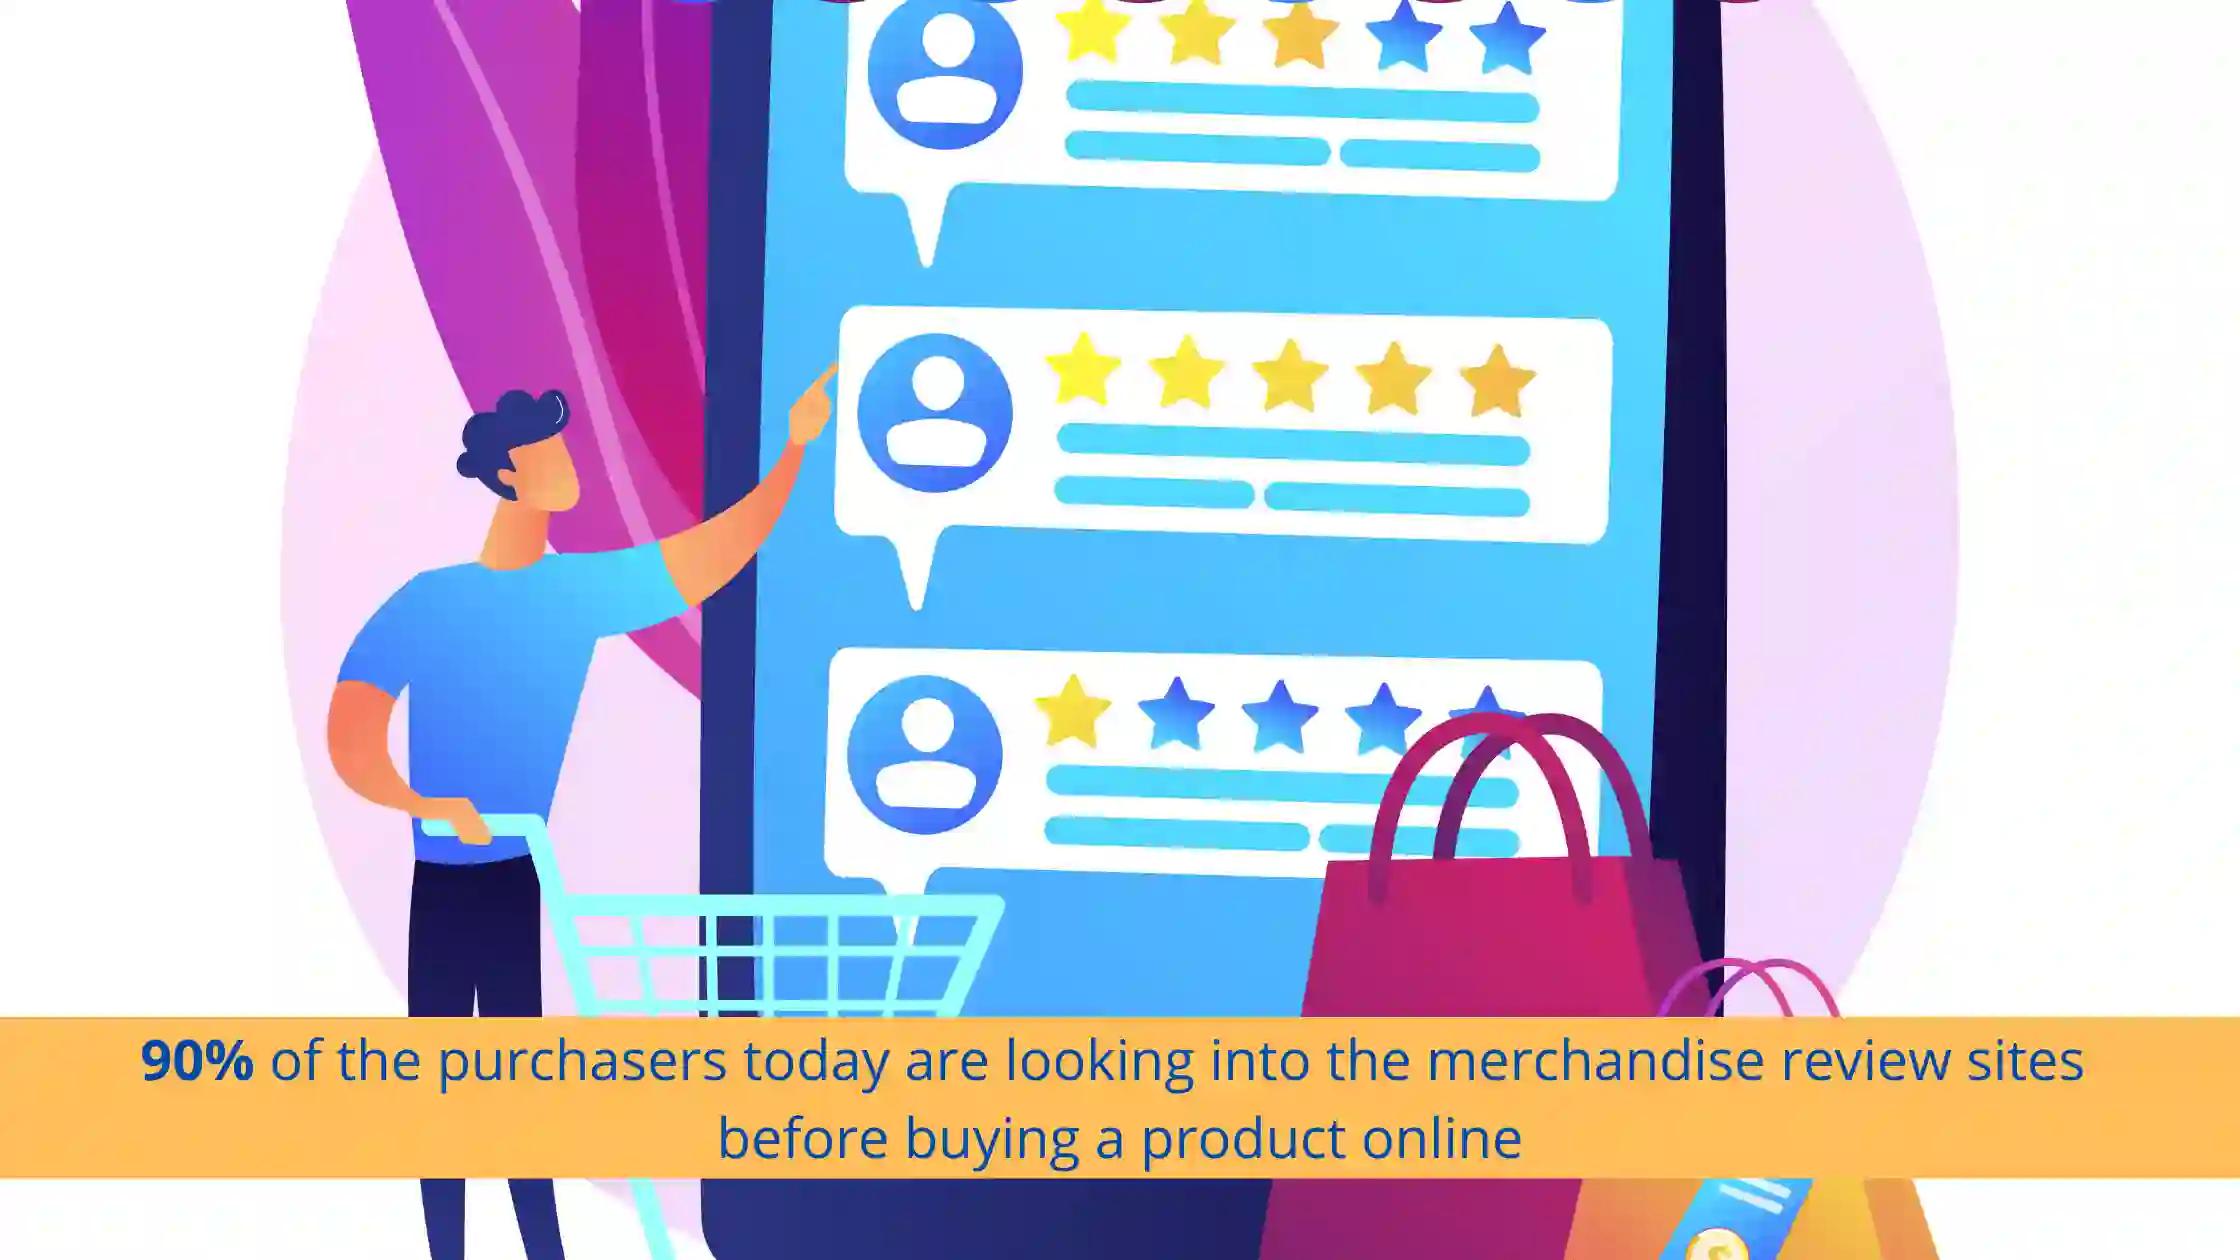 90 percent of the purchasers today are looking into the merchandise review sites before buying a product online